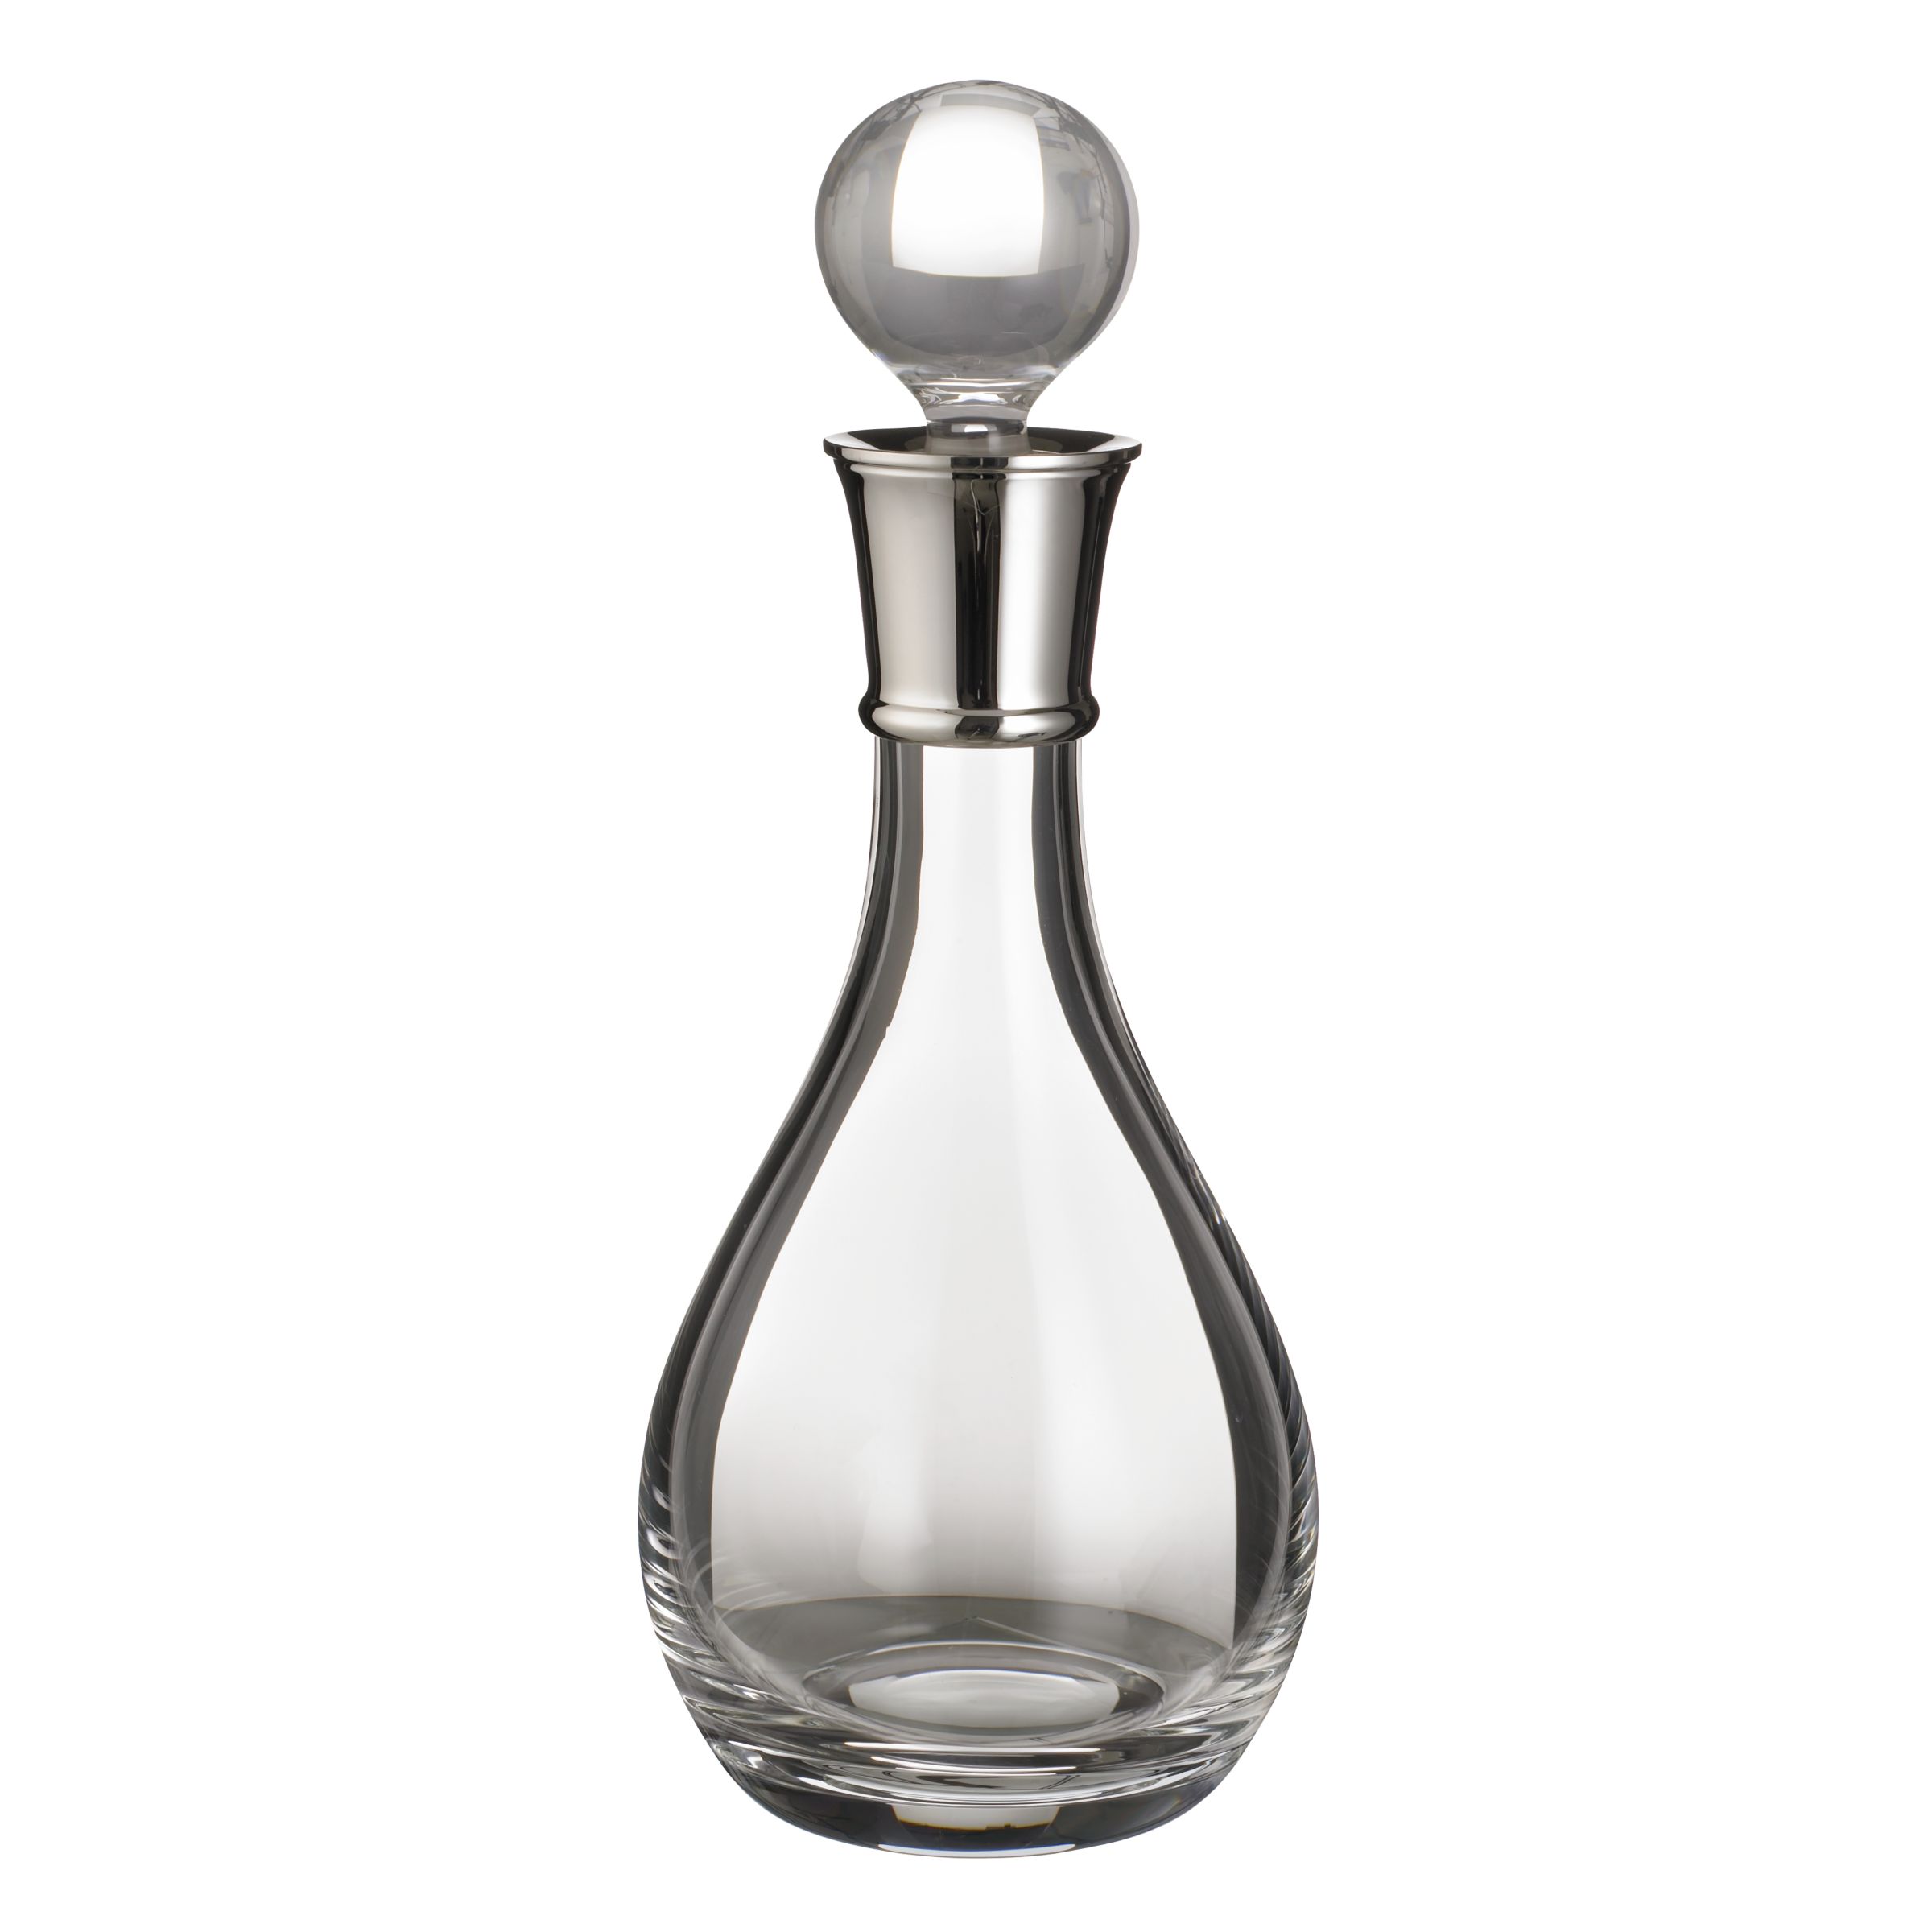 Sterling Silver Wine Decanter at John Lewis